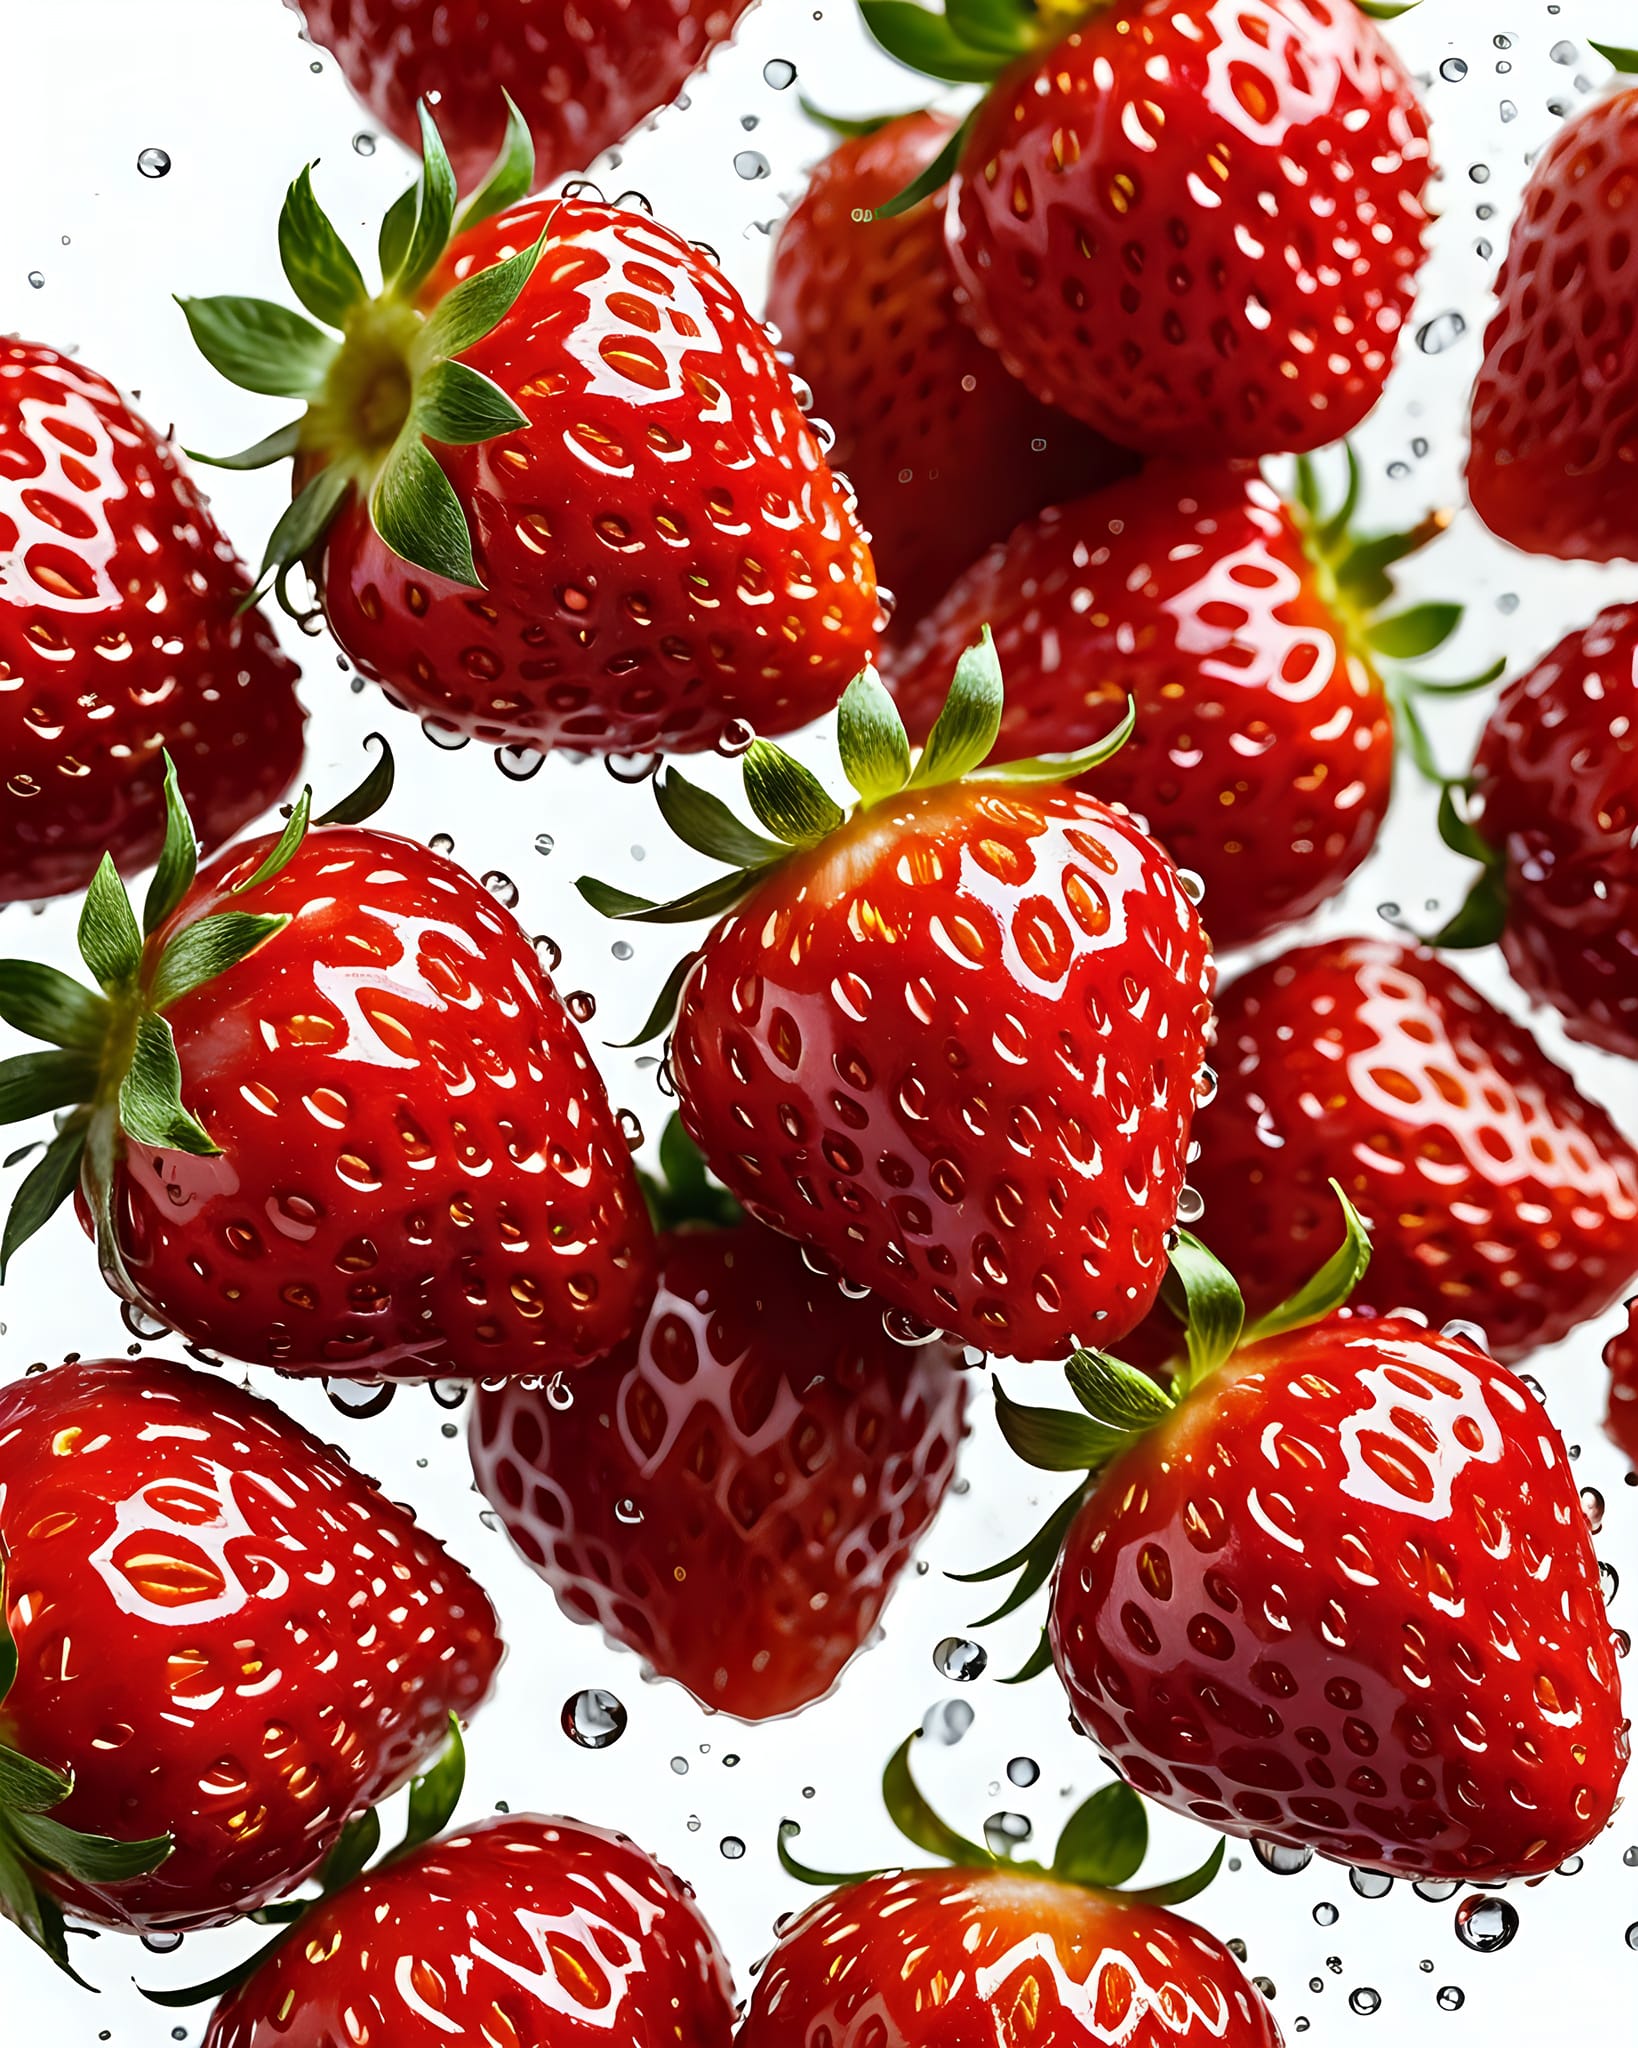 Every drop tells a story of sweetness. Let the freshest strawberries brighten yo...